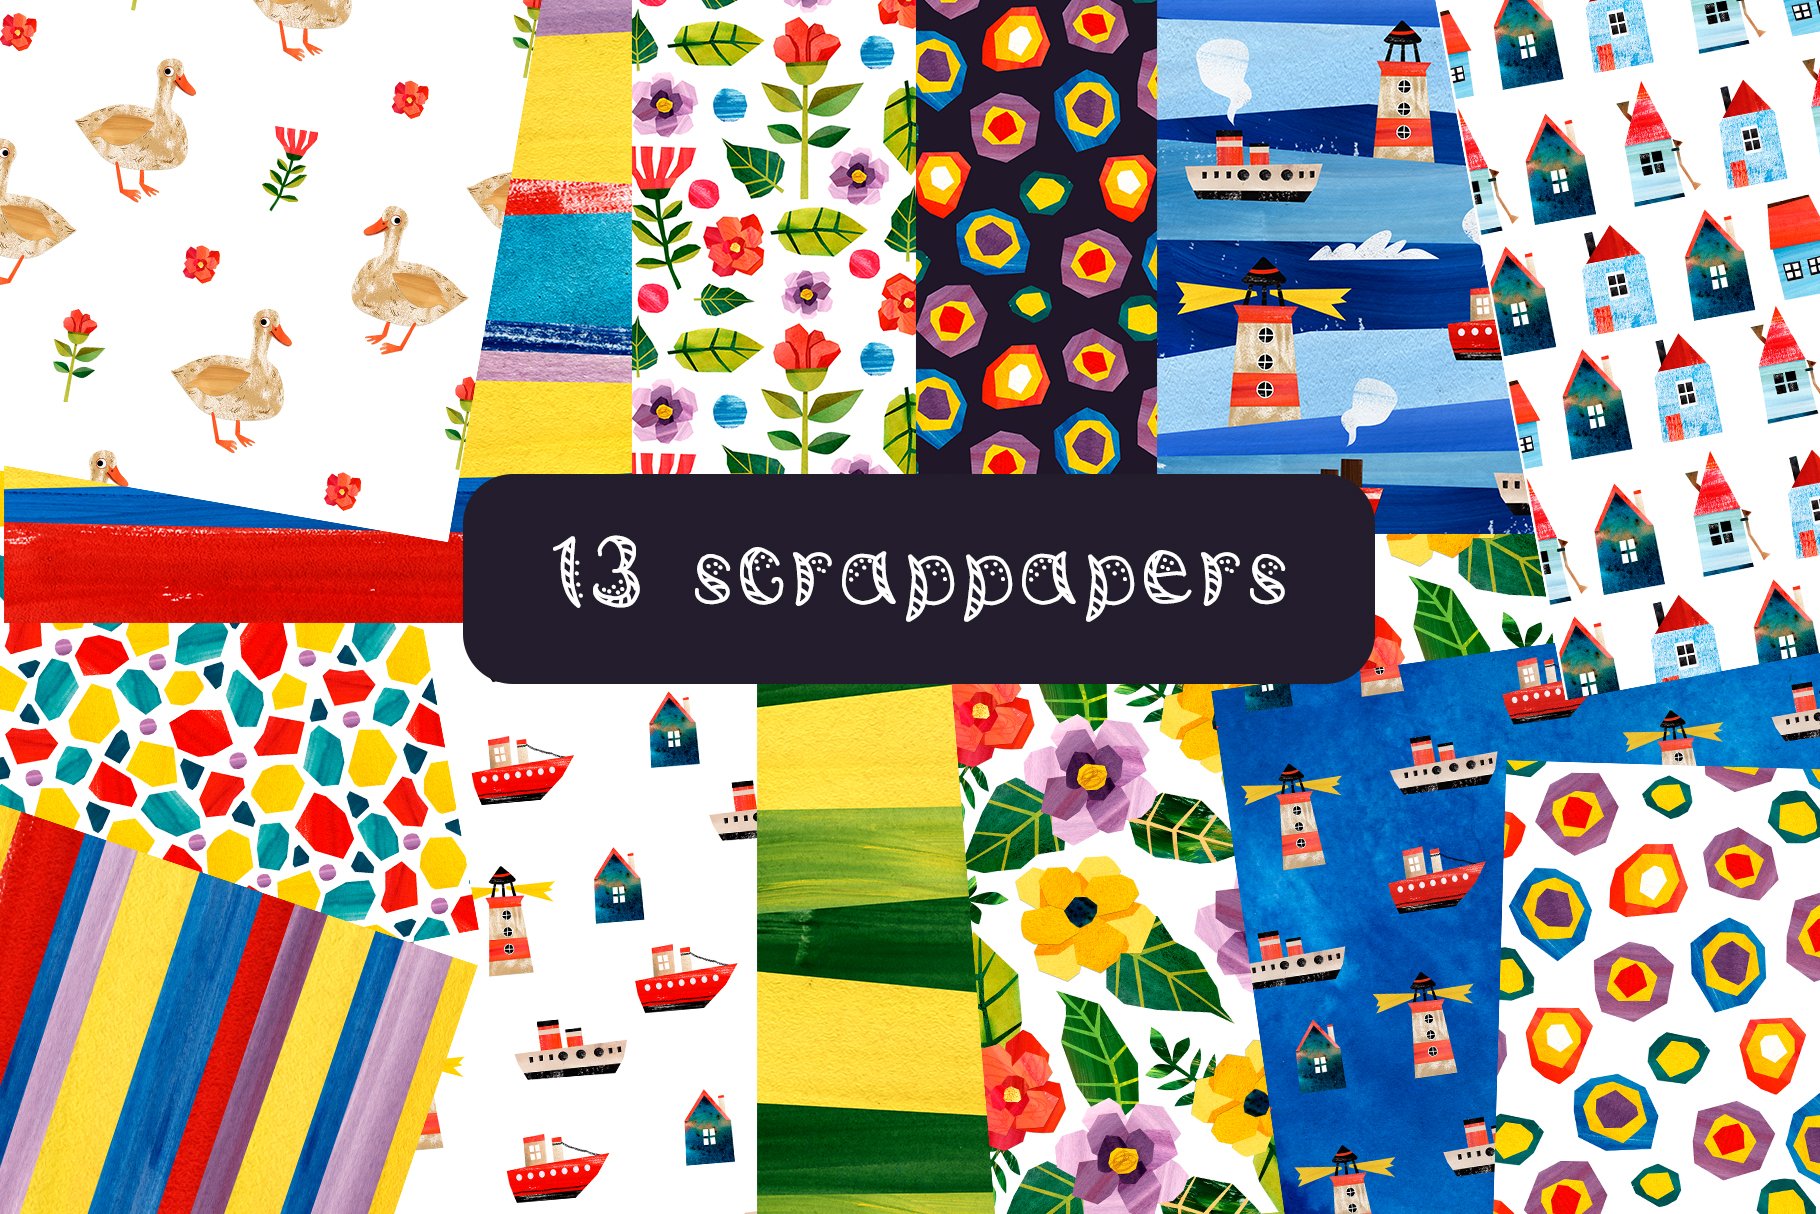 There are 13 colorful designed scrappers.